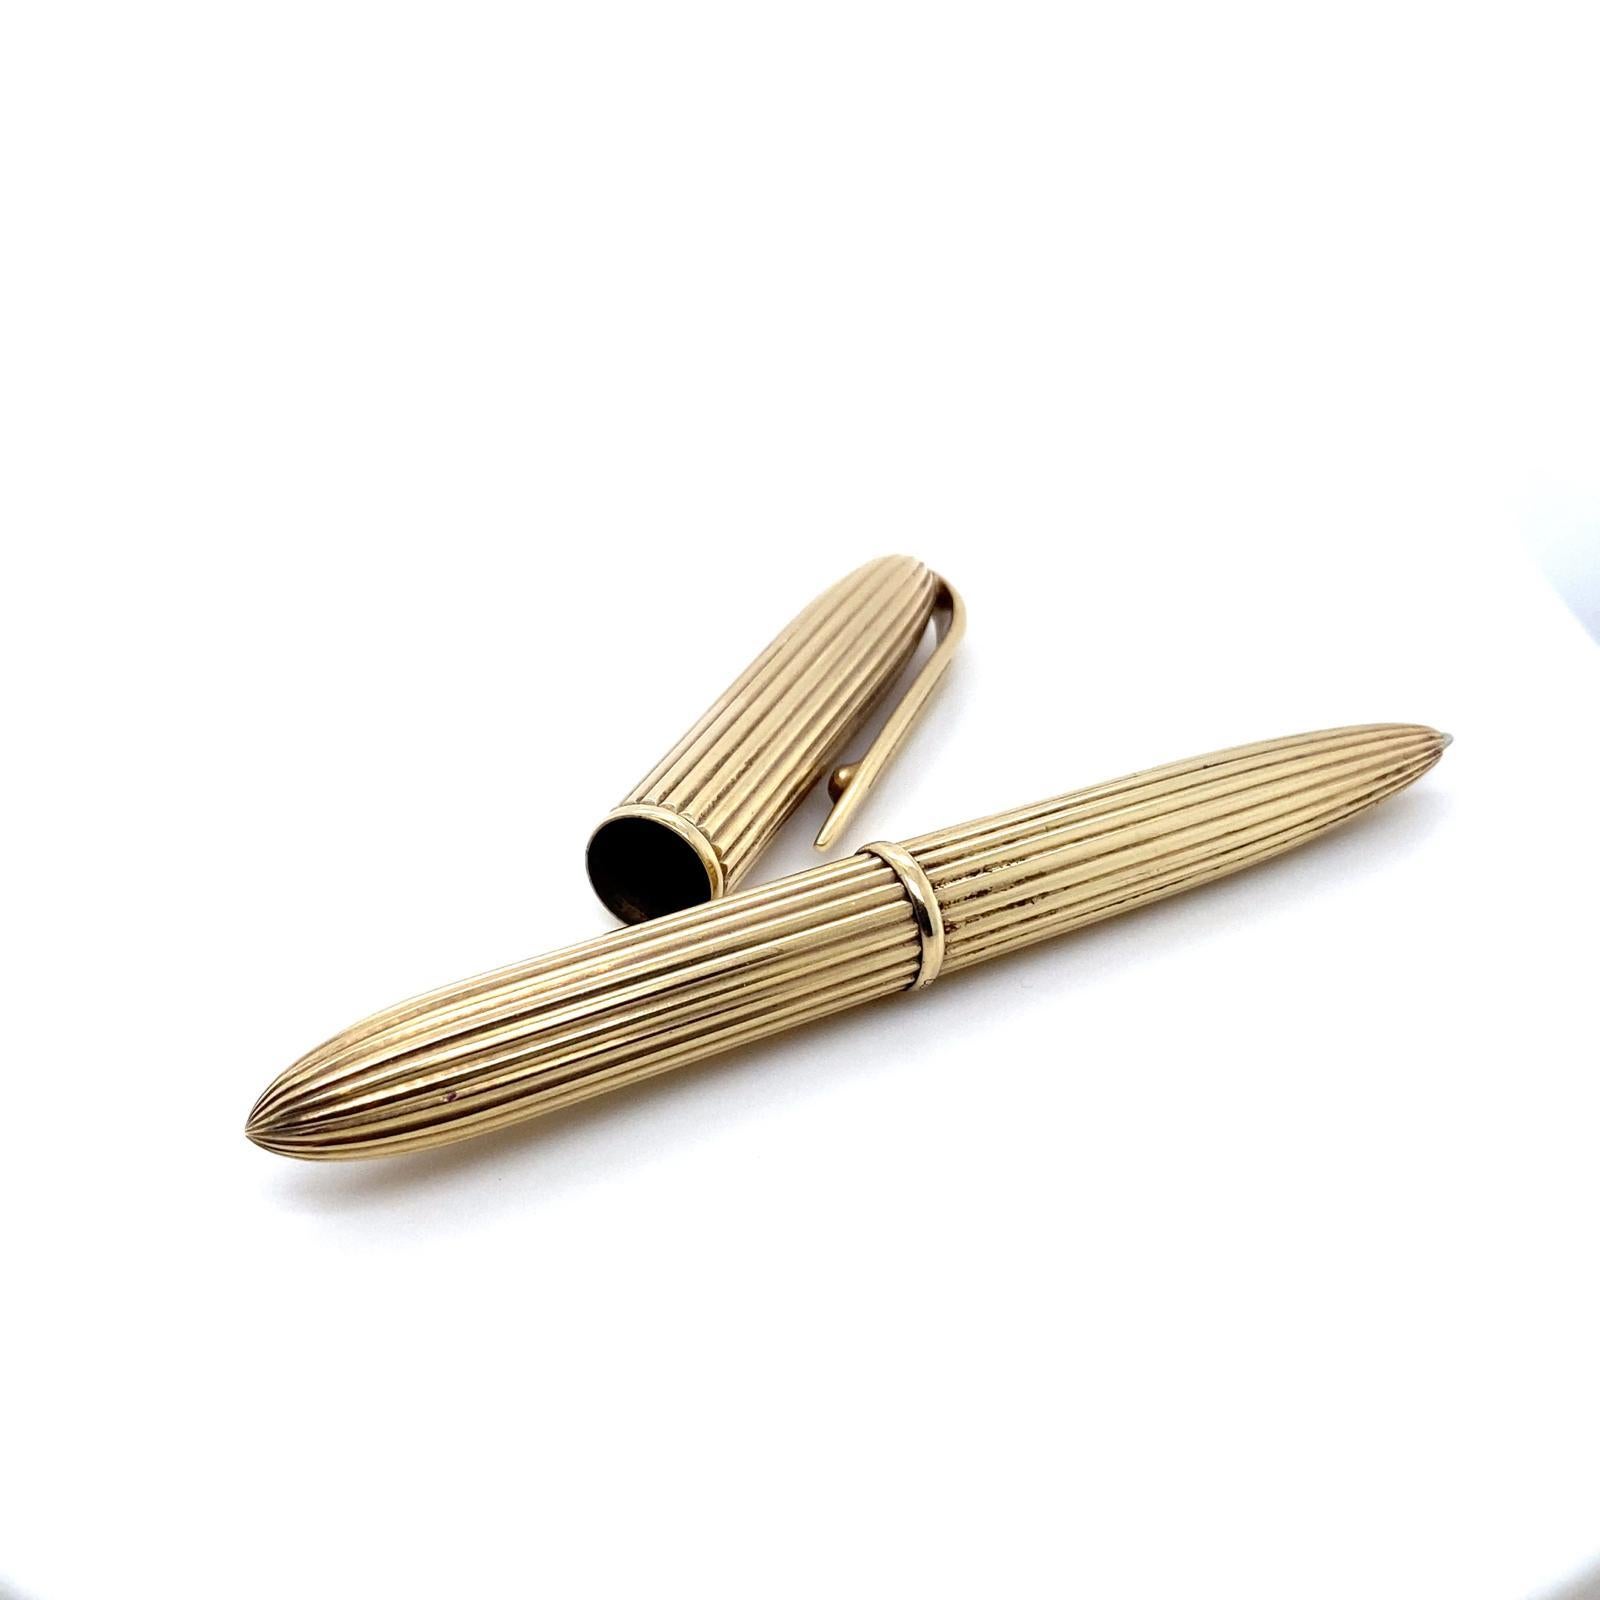 A vintage Cartier 9 carat yellow gold pen, circa 1970.

Designed in ridged yellow gold, with a gently rounded cap and barrel and tapered clip, this is a smart and elegant addition to an office or jacket pocket.

This pen from Cartier is every bit as